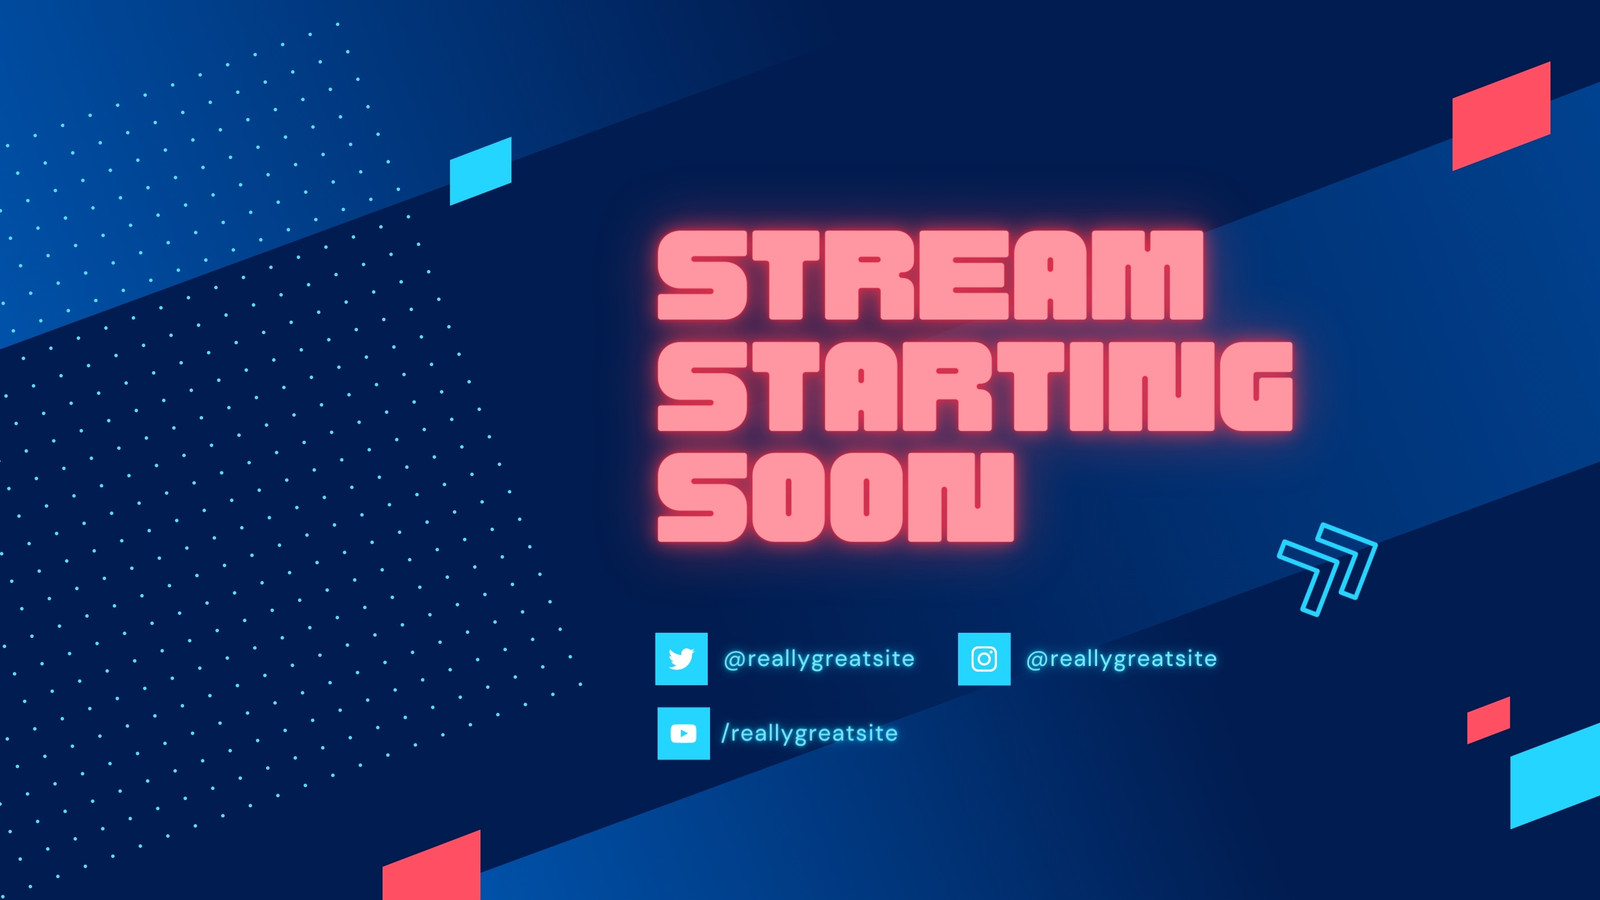 Page 4 - Free and customizable Twitch screen templates | Canva